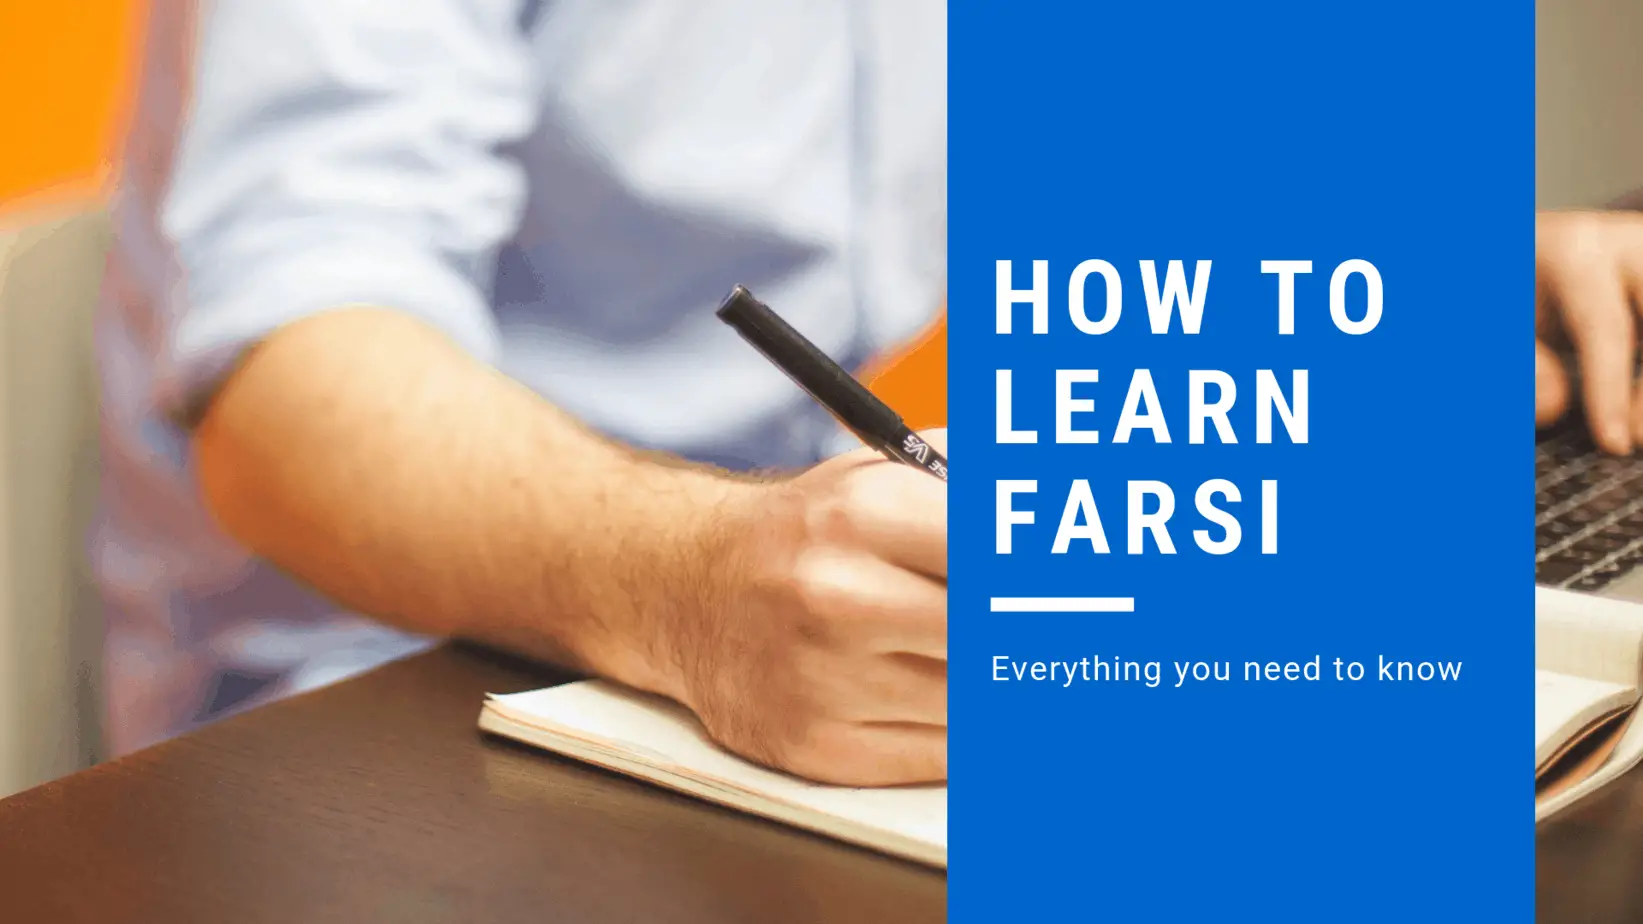 How to Learn Farsi: Everything You Need to Know